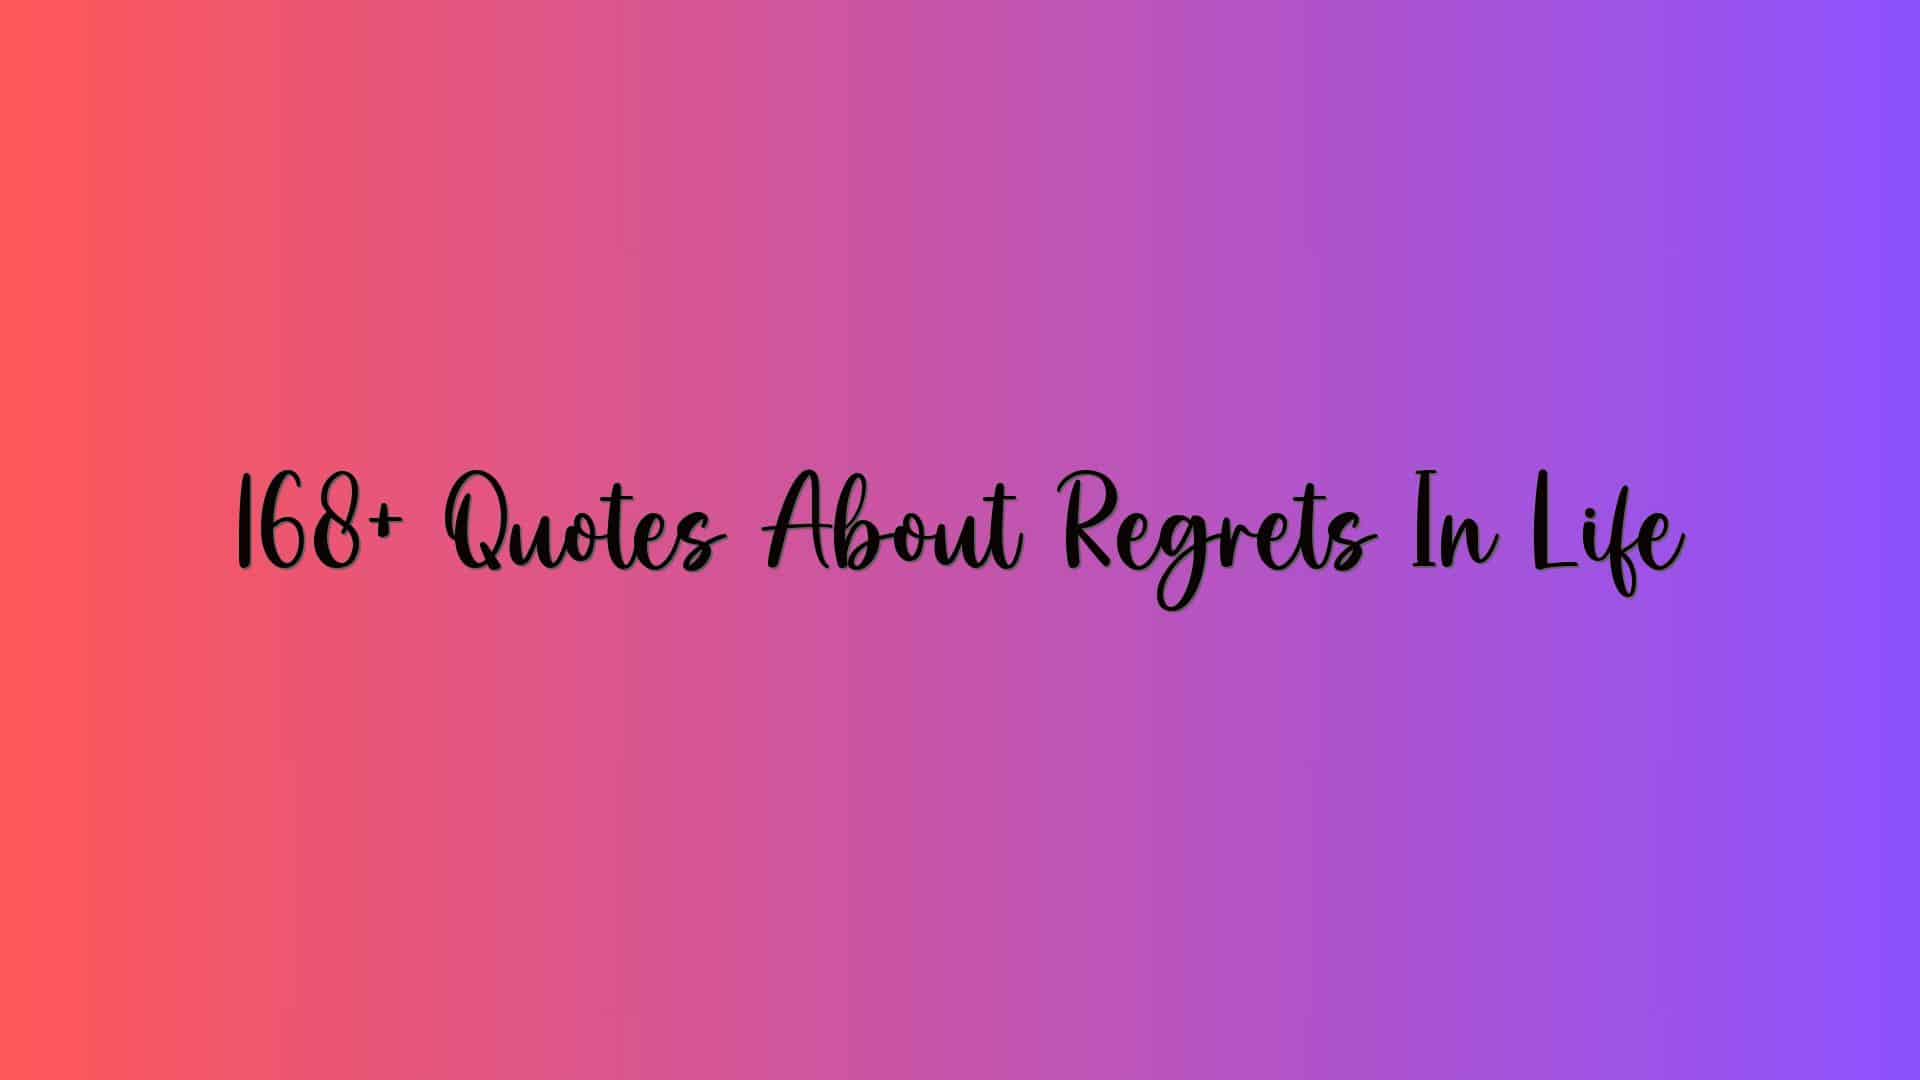 168+ Quotes About Regrets In Life